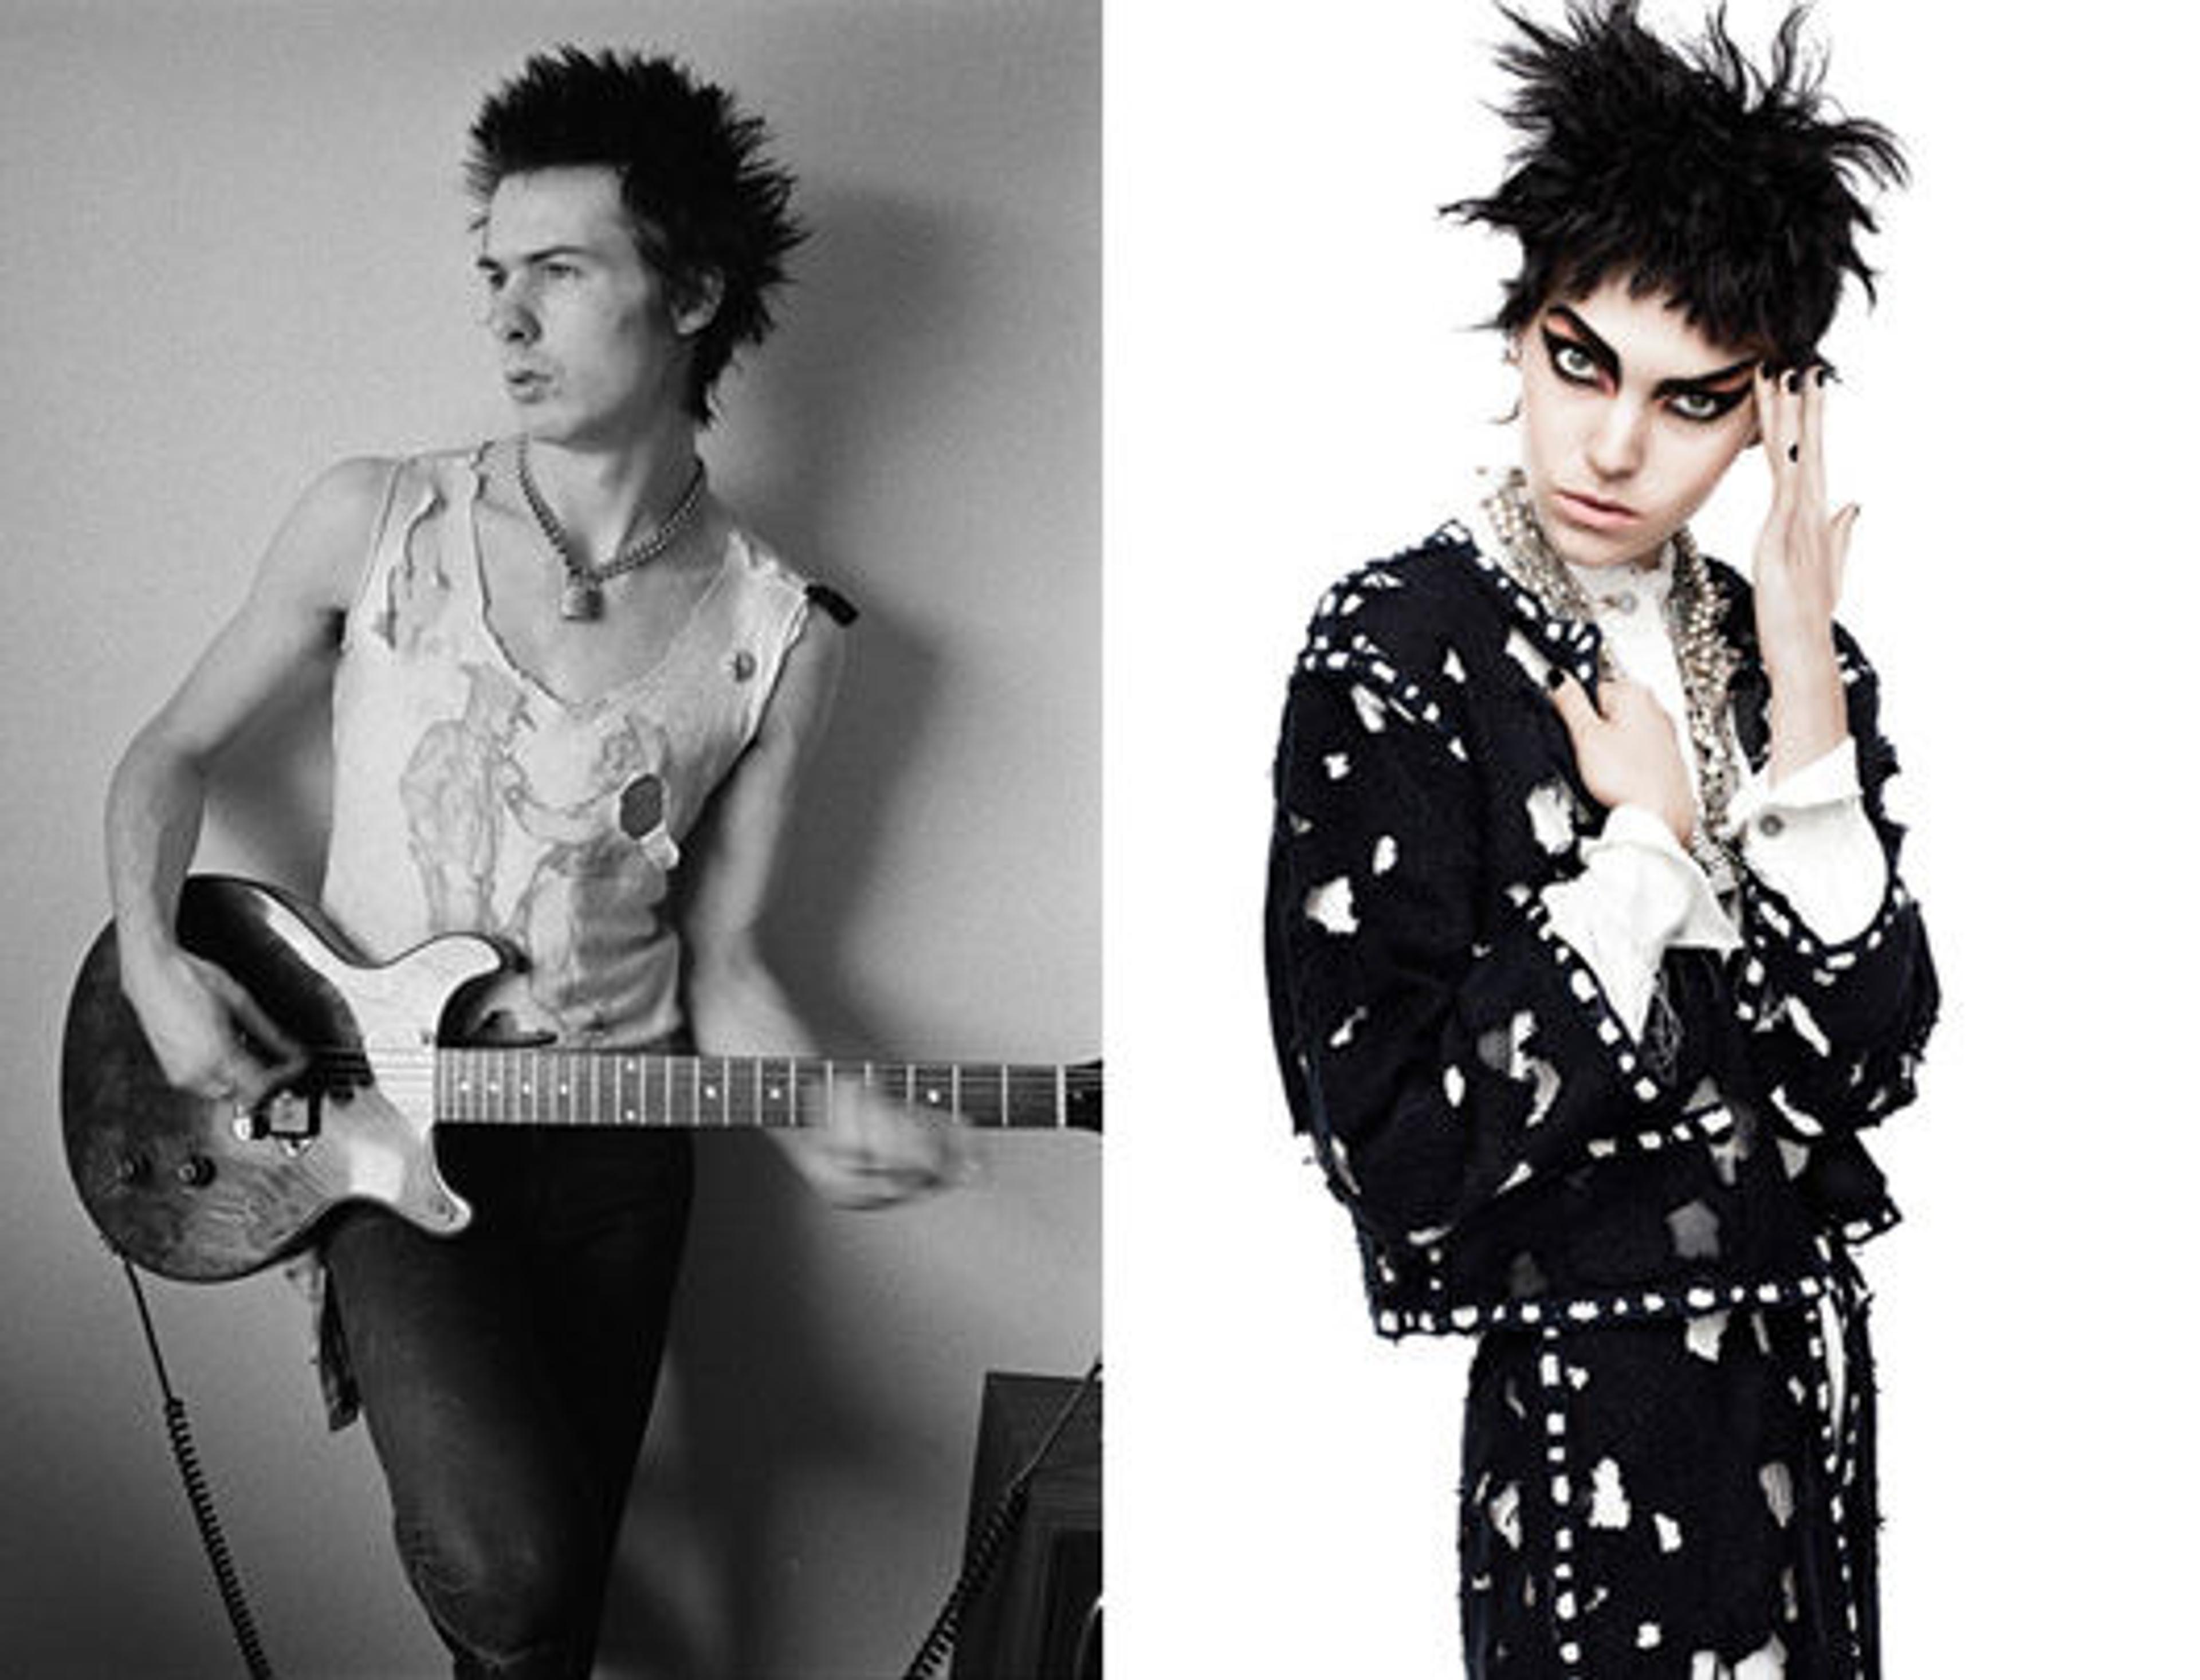 Left: Sid Vicious, 1977, Photograph © Dennis Morris, All Rights Reserved; Right: Karl Lagerfeld for House of Chanel, Photograph by David Sims